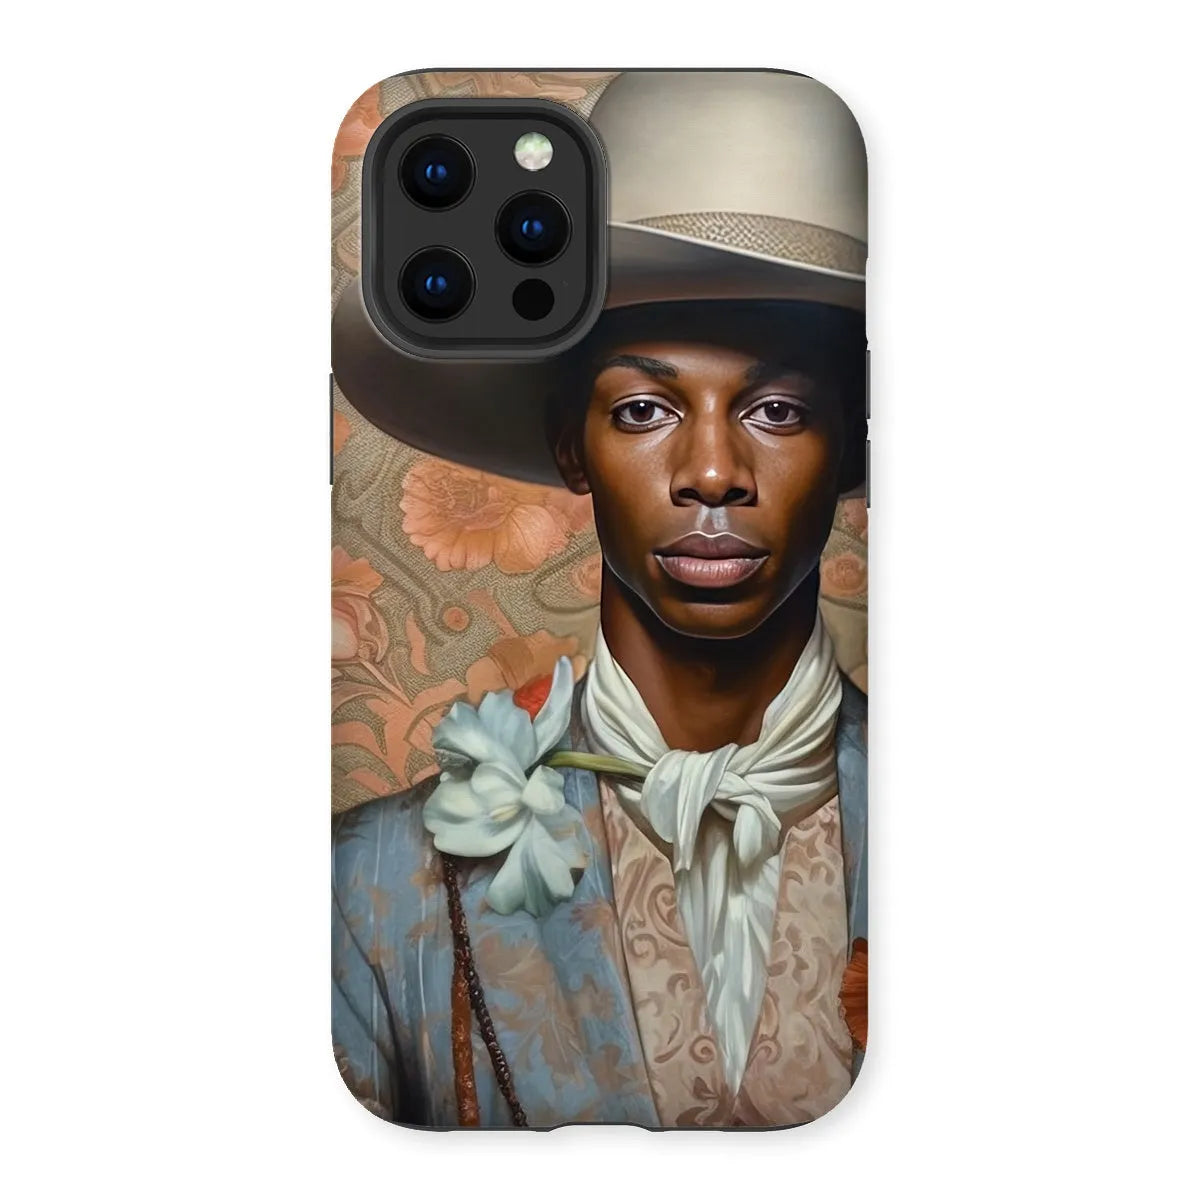 Apollo The Gay Cowboy - Gay Aesthetic Art Phone Case - Iphone 13 Pro Max / Matte - Mobile Phone Cases - Aesthetic Art